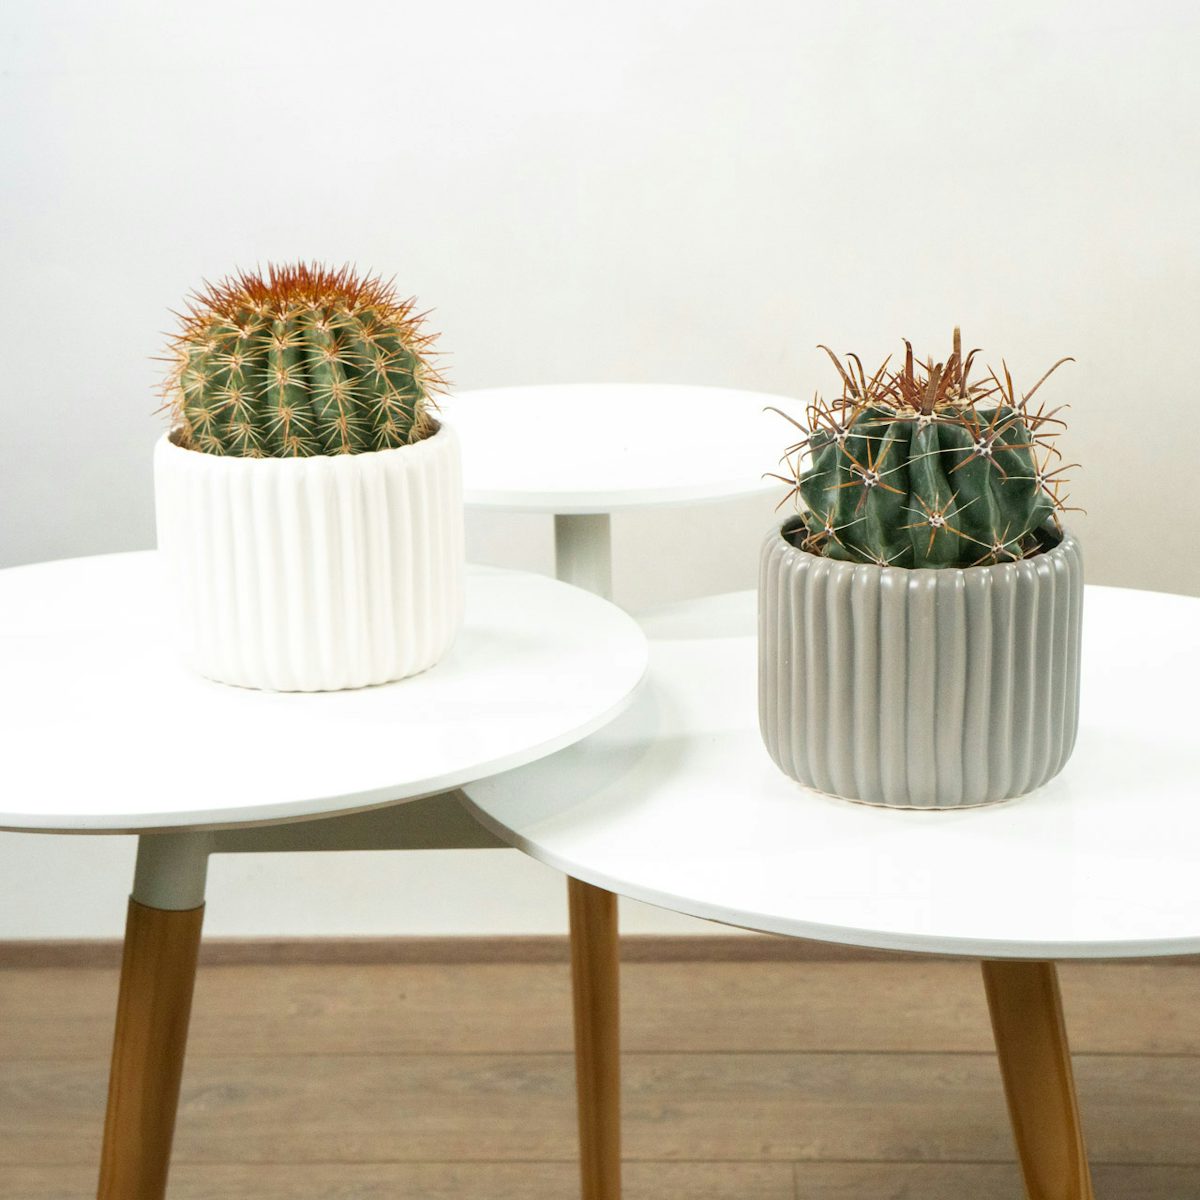 Cactus Duo with Planters